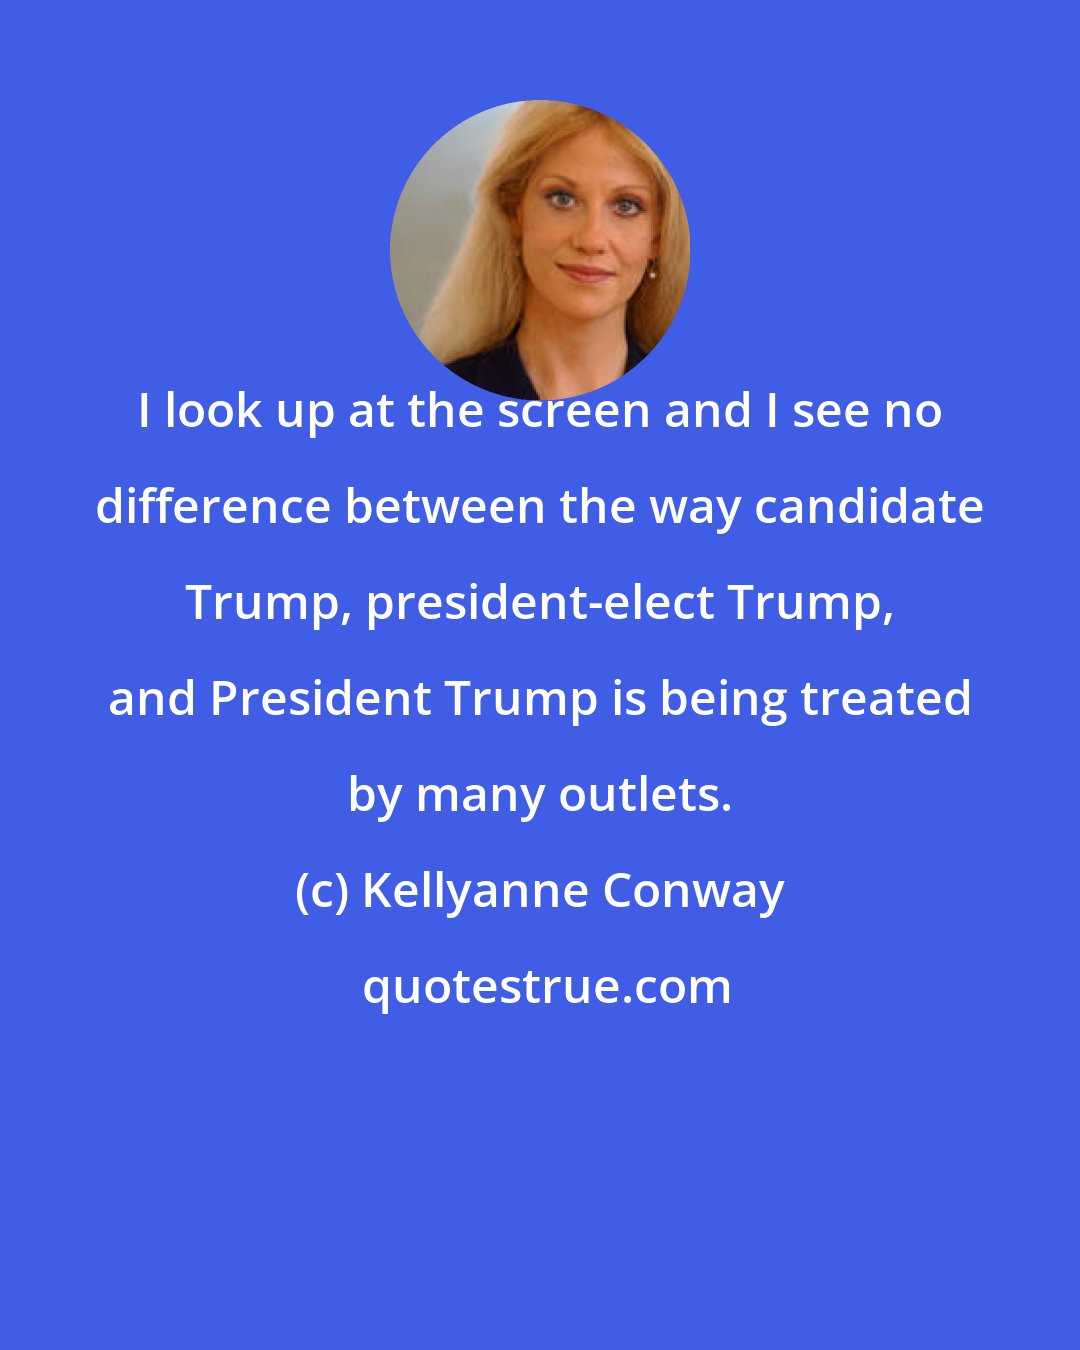 Kellyanne Conway: I look up at the screen and I see no difference between the way candidate Trump, president-elect Trump, and President Trump is being treated by many outlets.